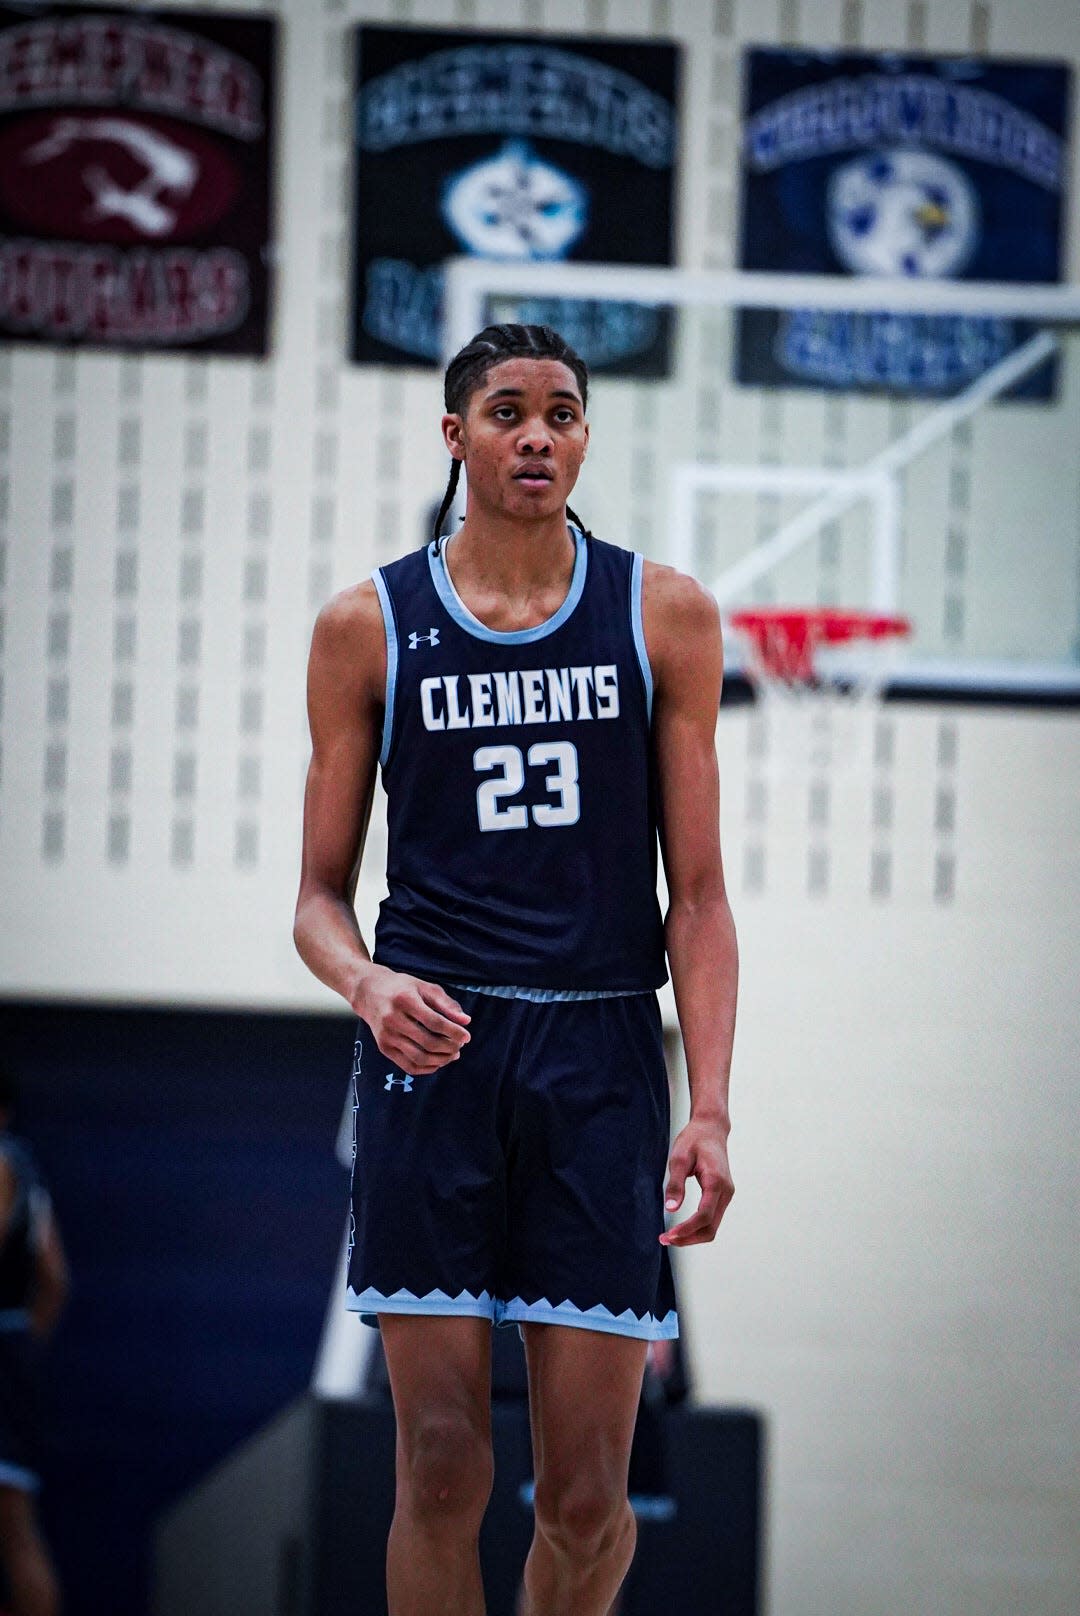 Josh Clark is a 7-foot center from Clements High School in Texas who is committed to Marquette in the 2024 recruiting class.